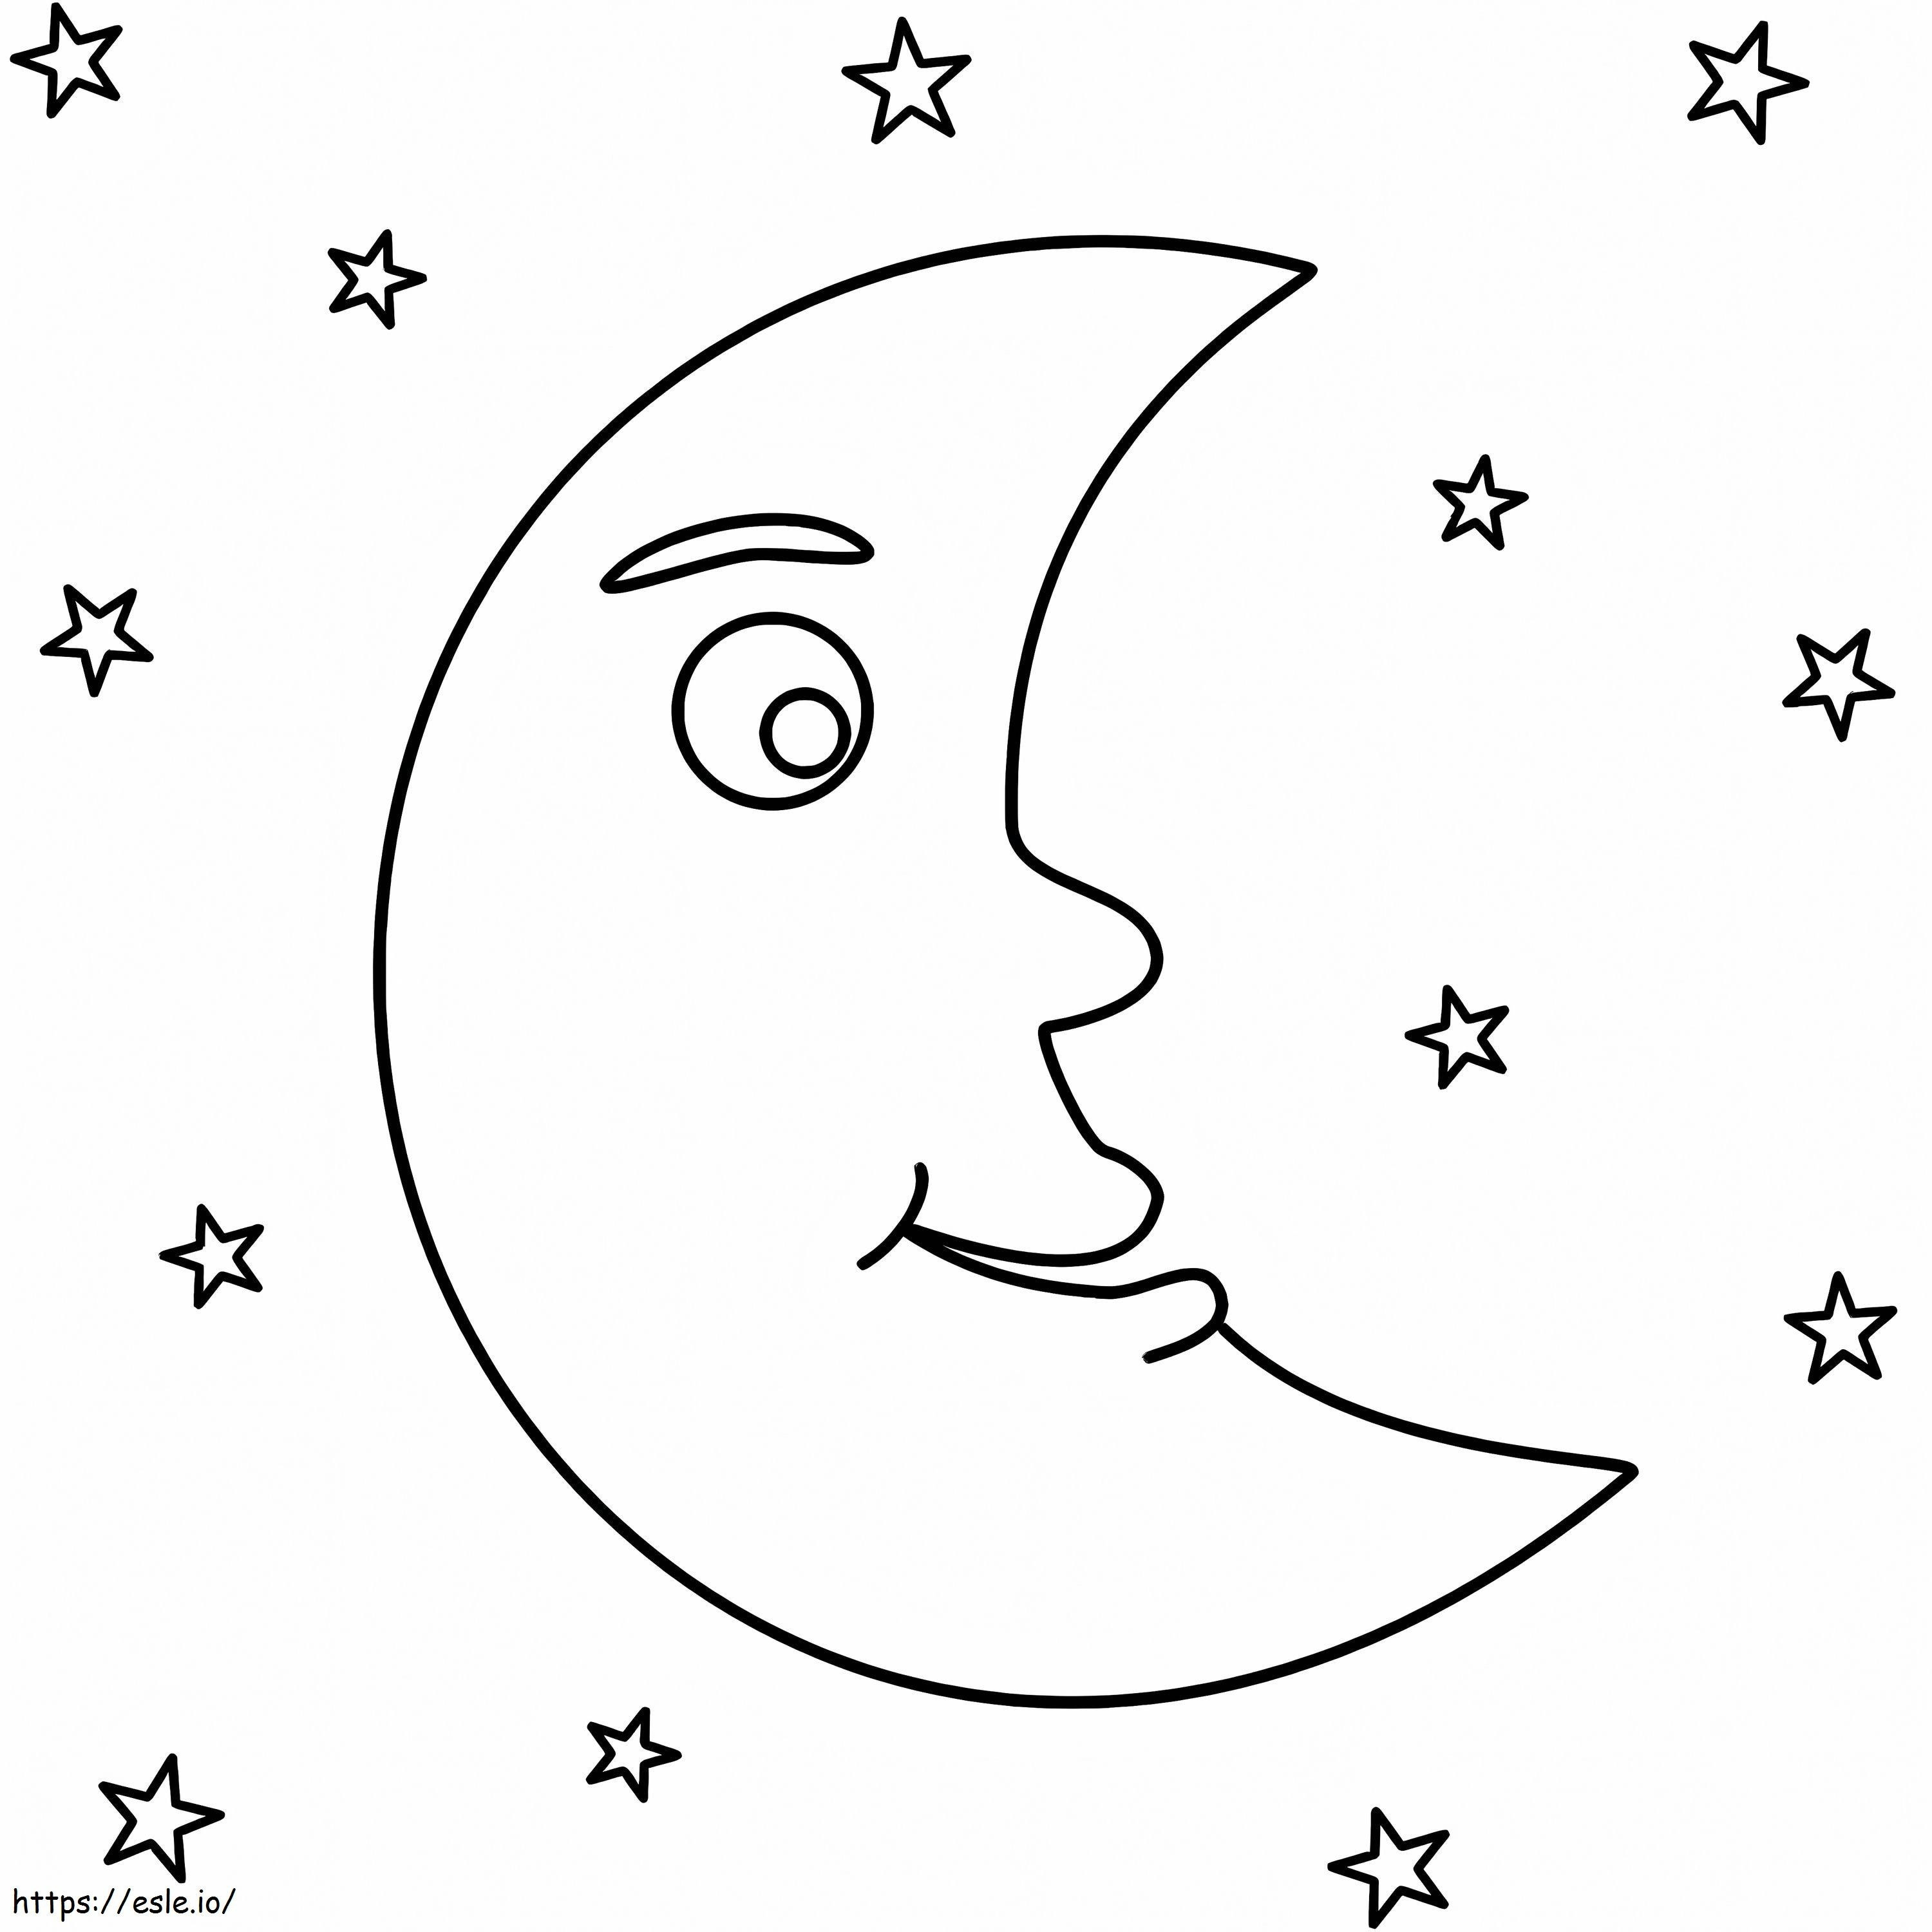 Fun Moon With Stars coloring page